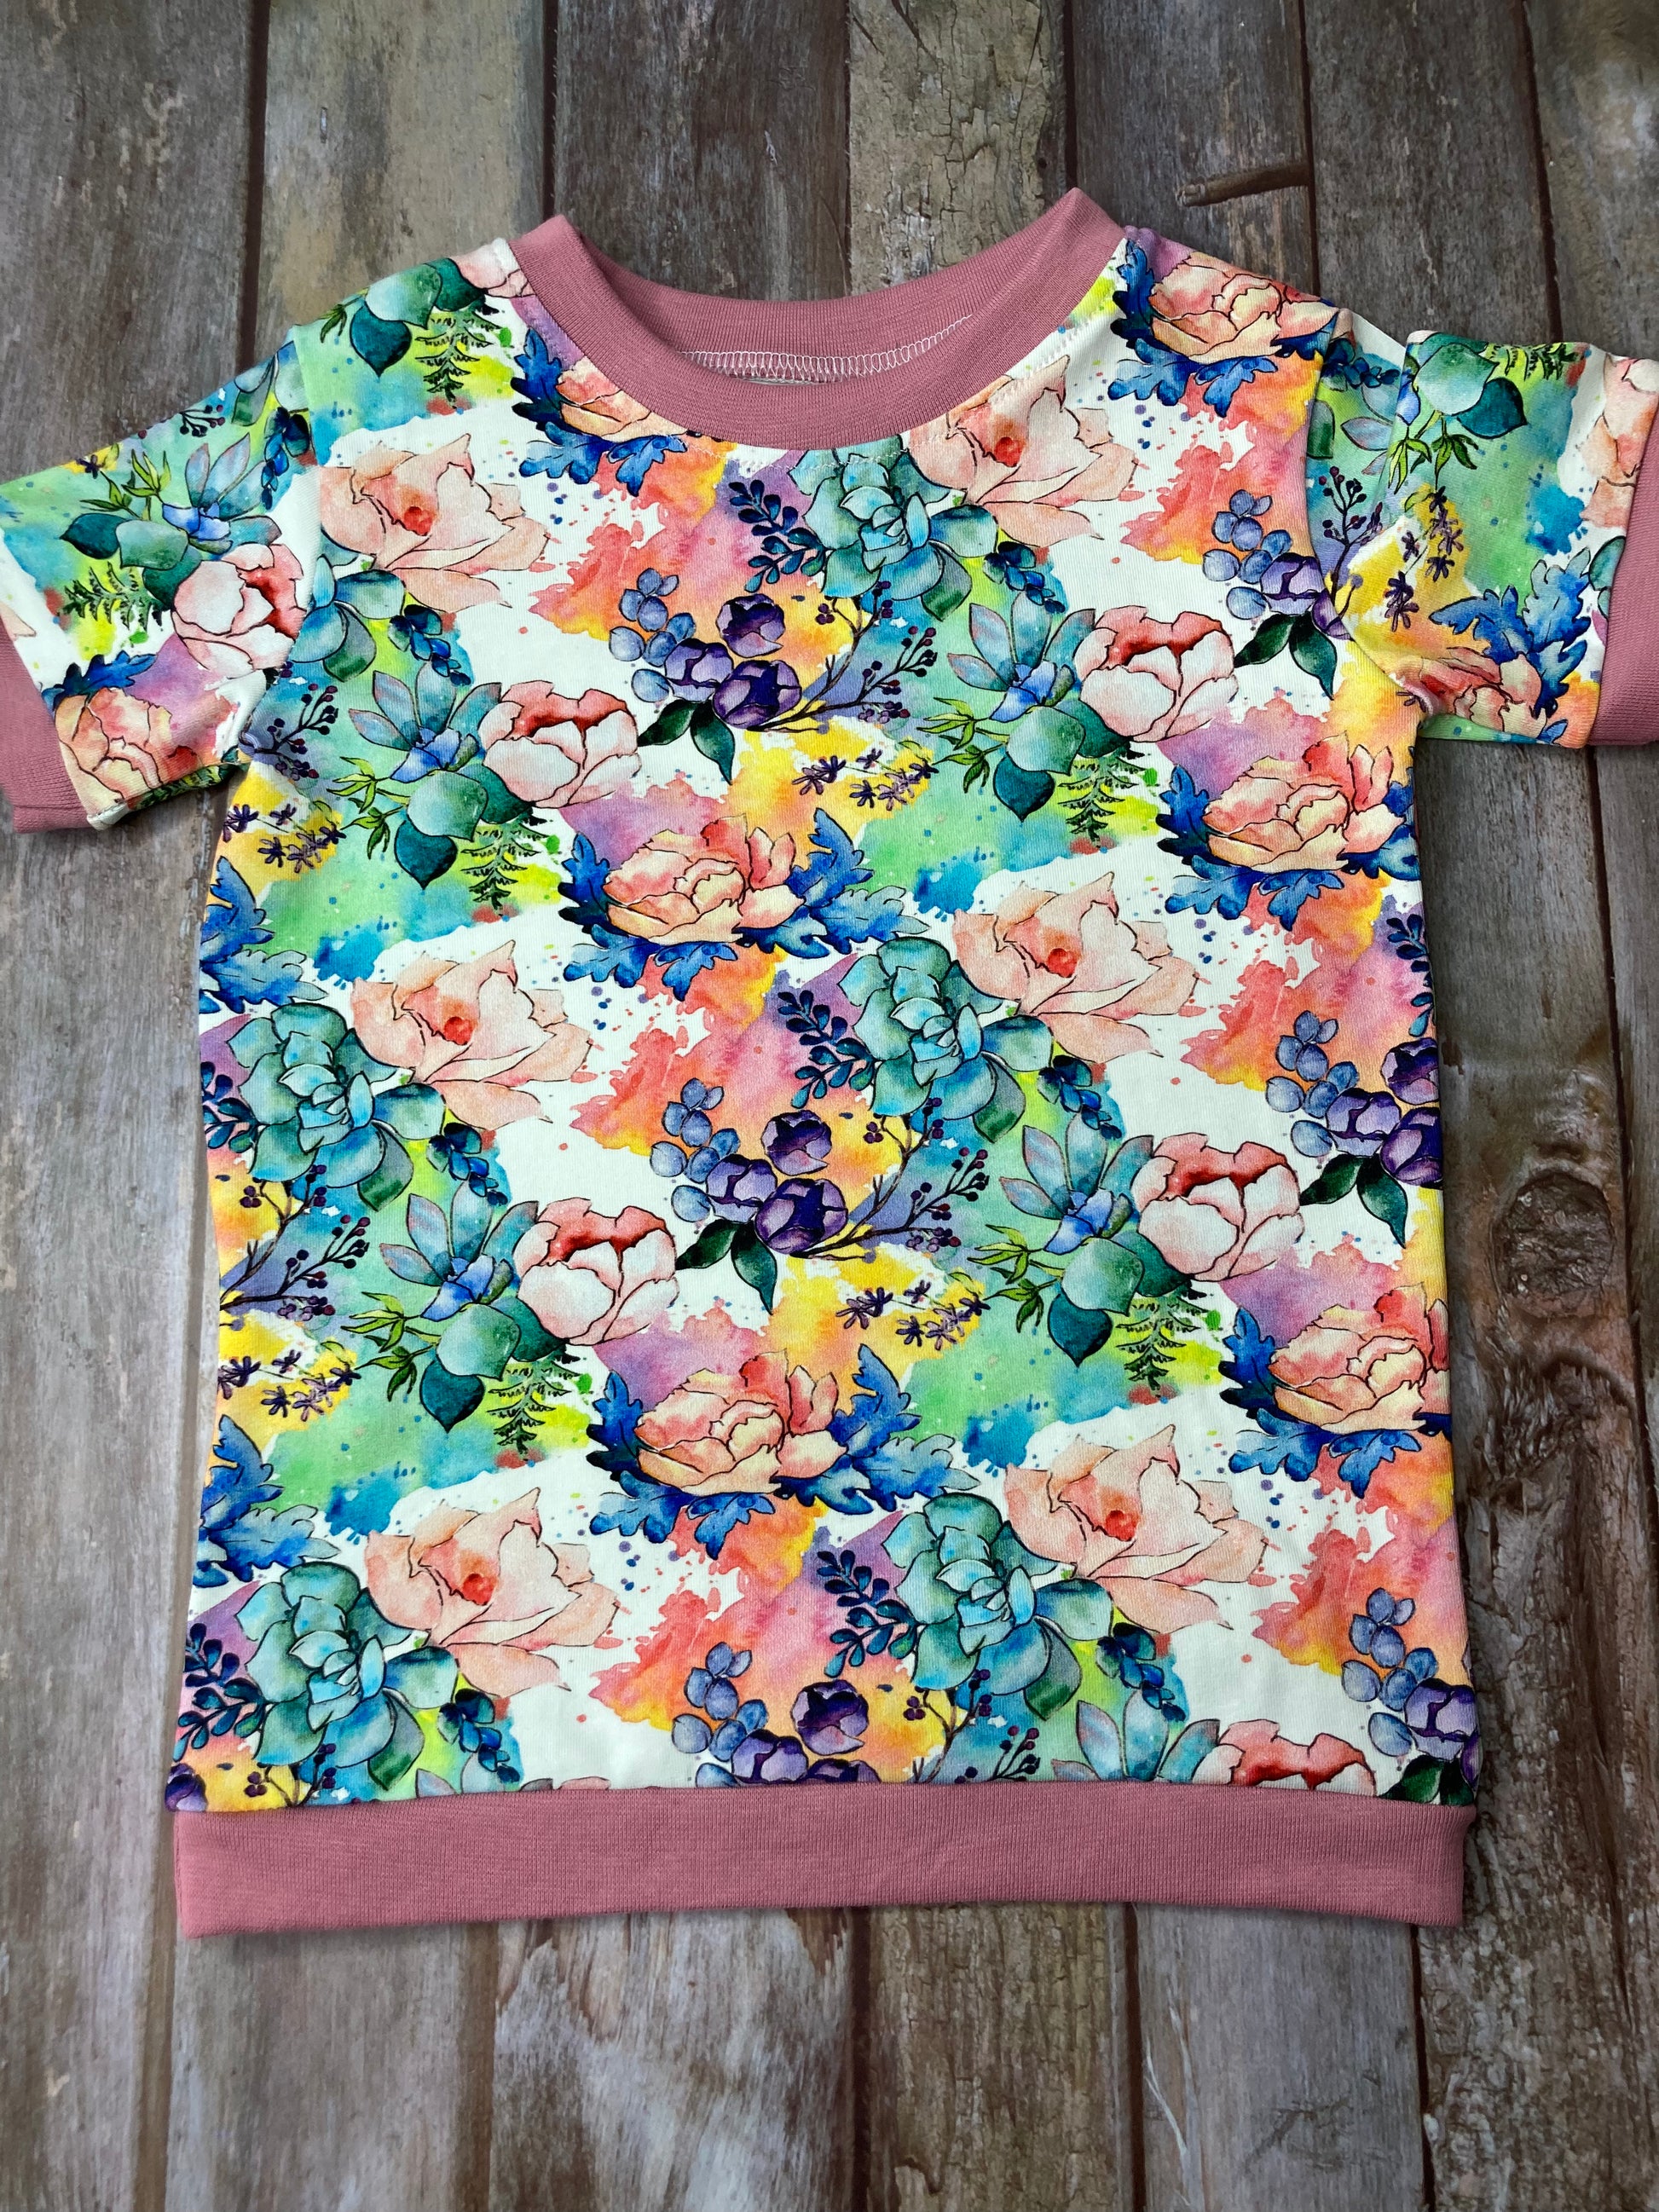 Kids Cuffed T-shirt cotton jersey - floral pink white green - age 1-4 - Uphouse Crafts